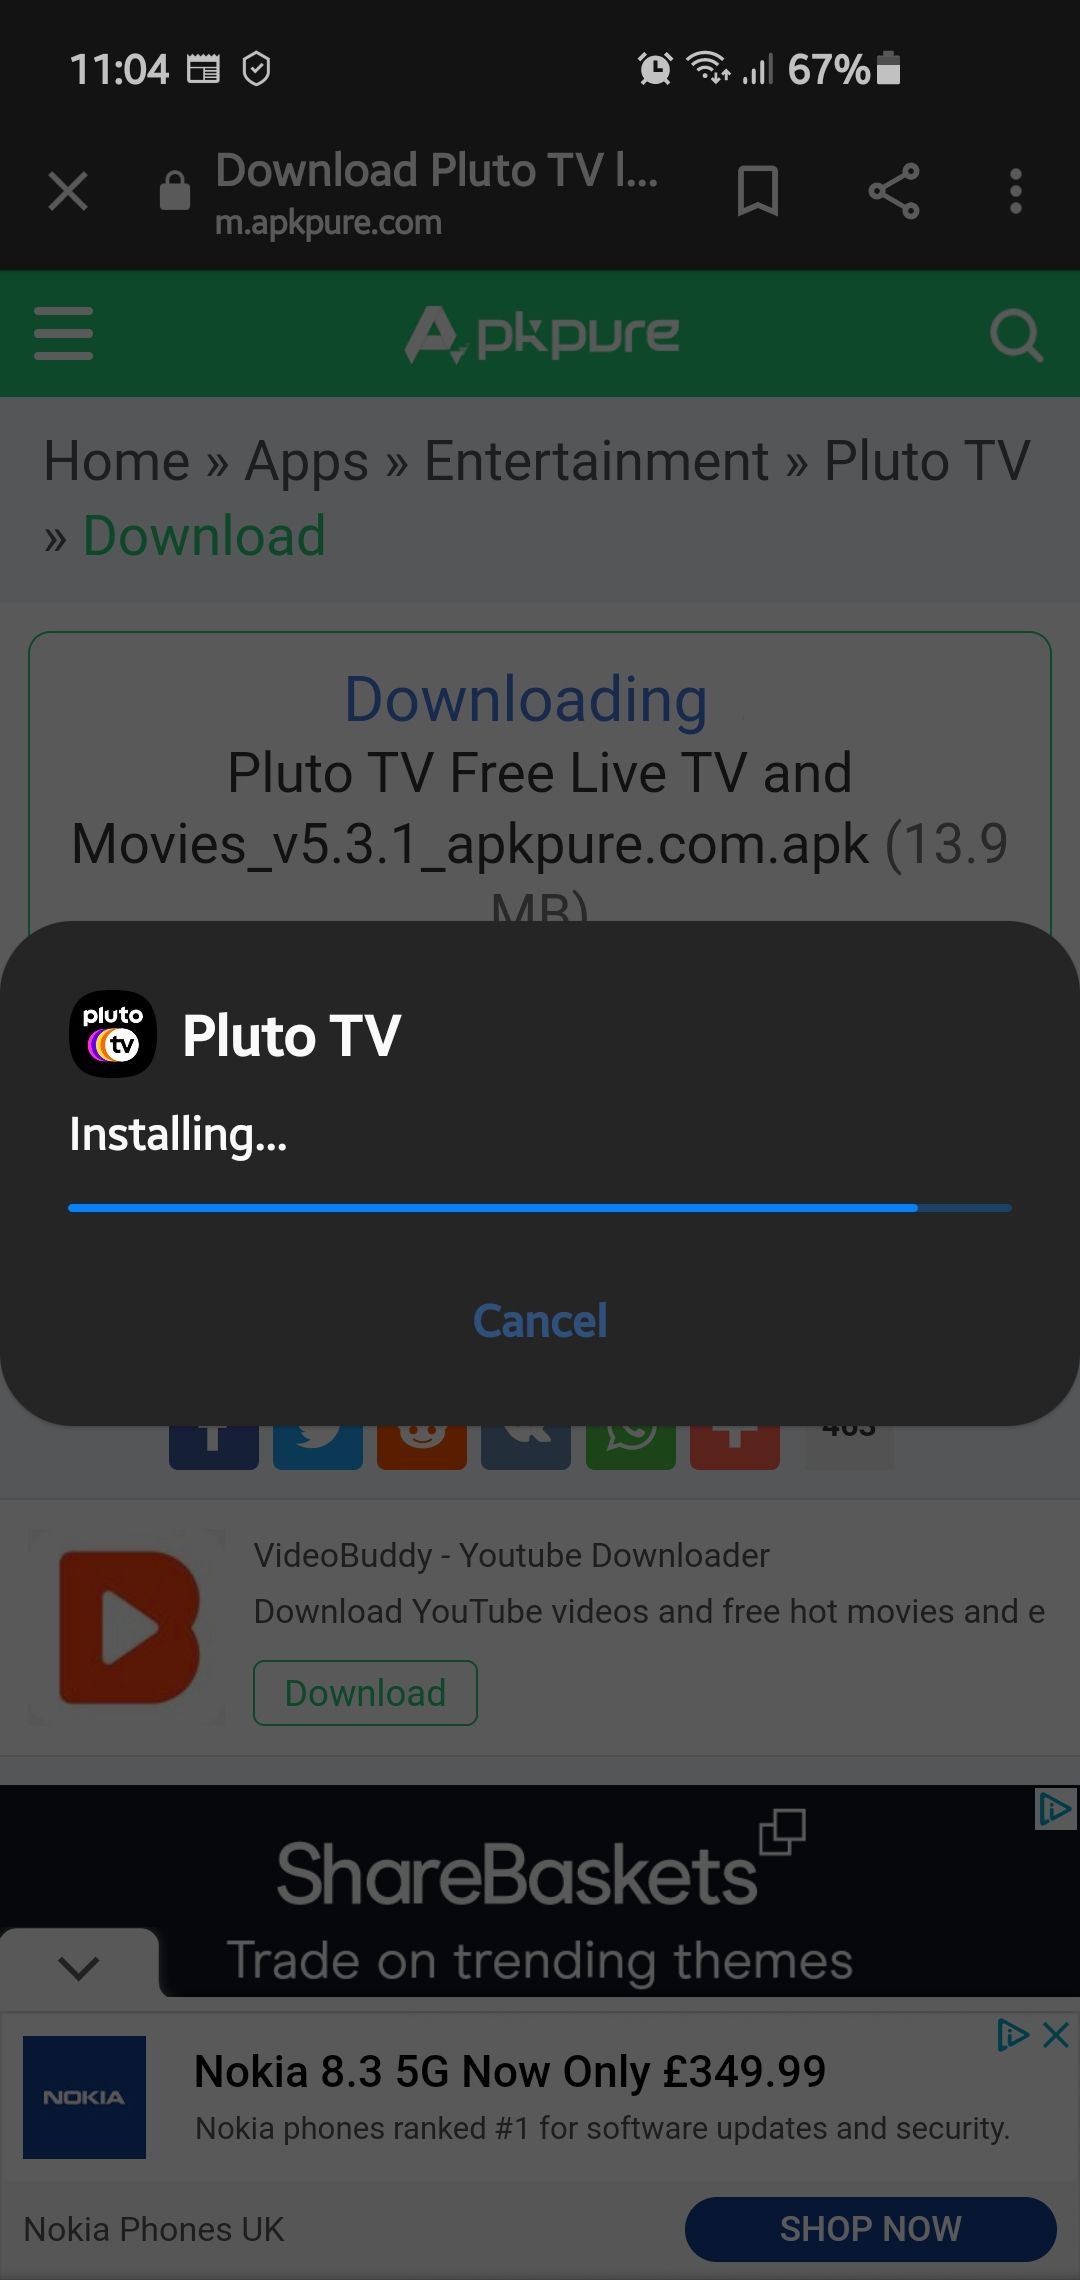 How To Download Pluto Tv On Samsung Smart Tv - Sky Backed Streaming Service Pluto Tv Launching ...